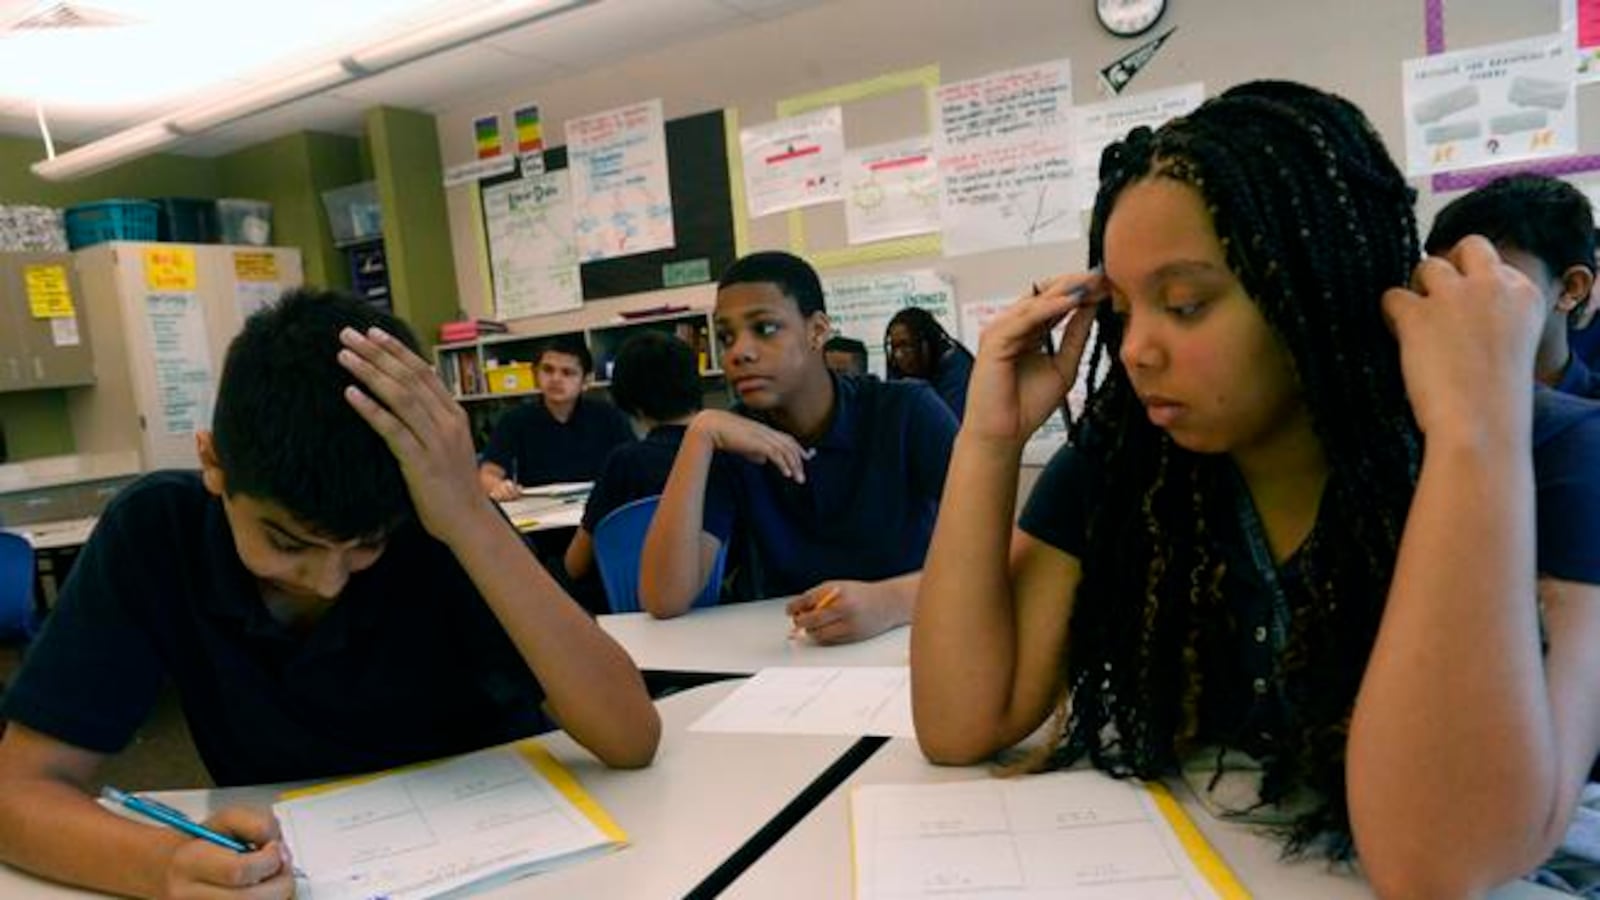 Students at Aurora's Boston K-8 school in spring 2015. (Photo by Helen H. Richardson/The Denver Post).